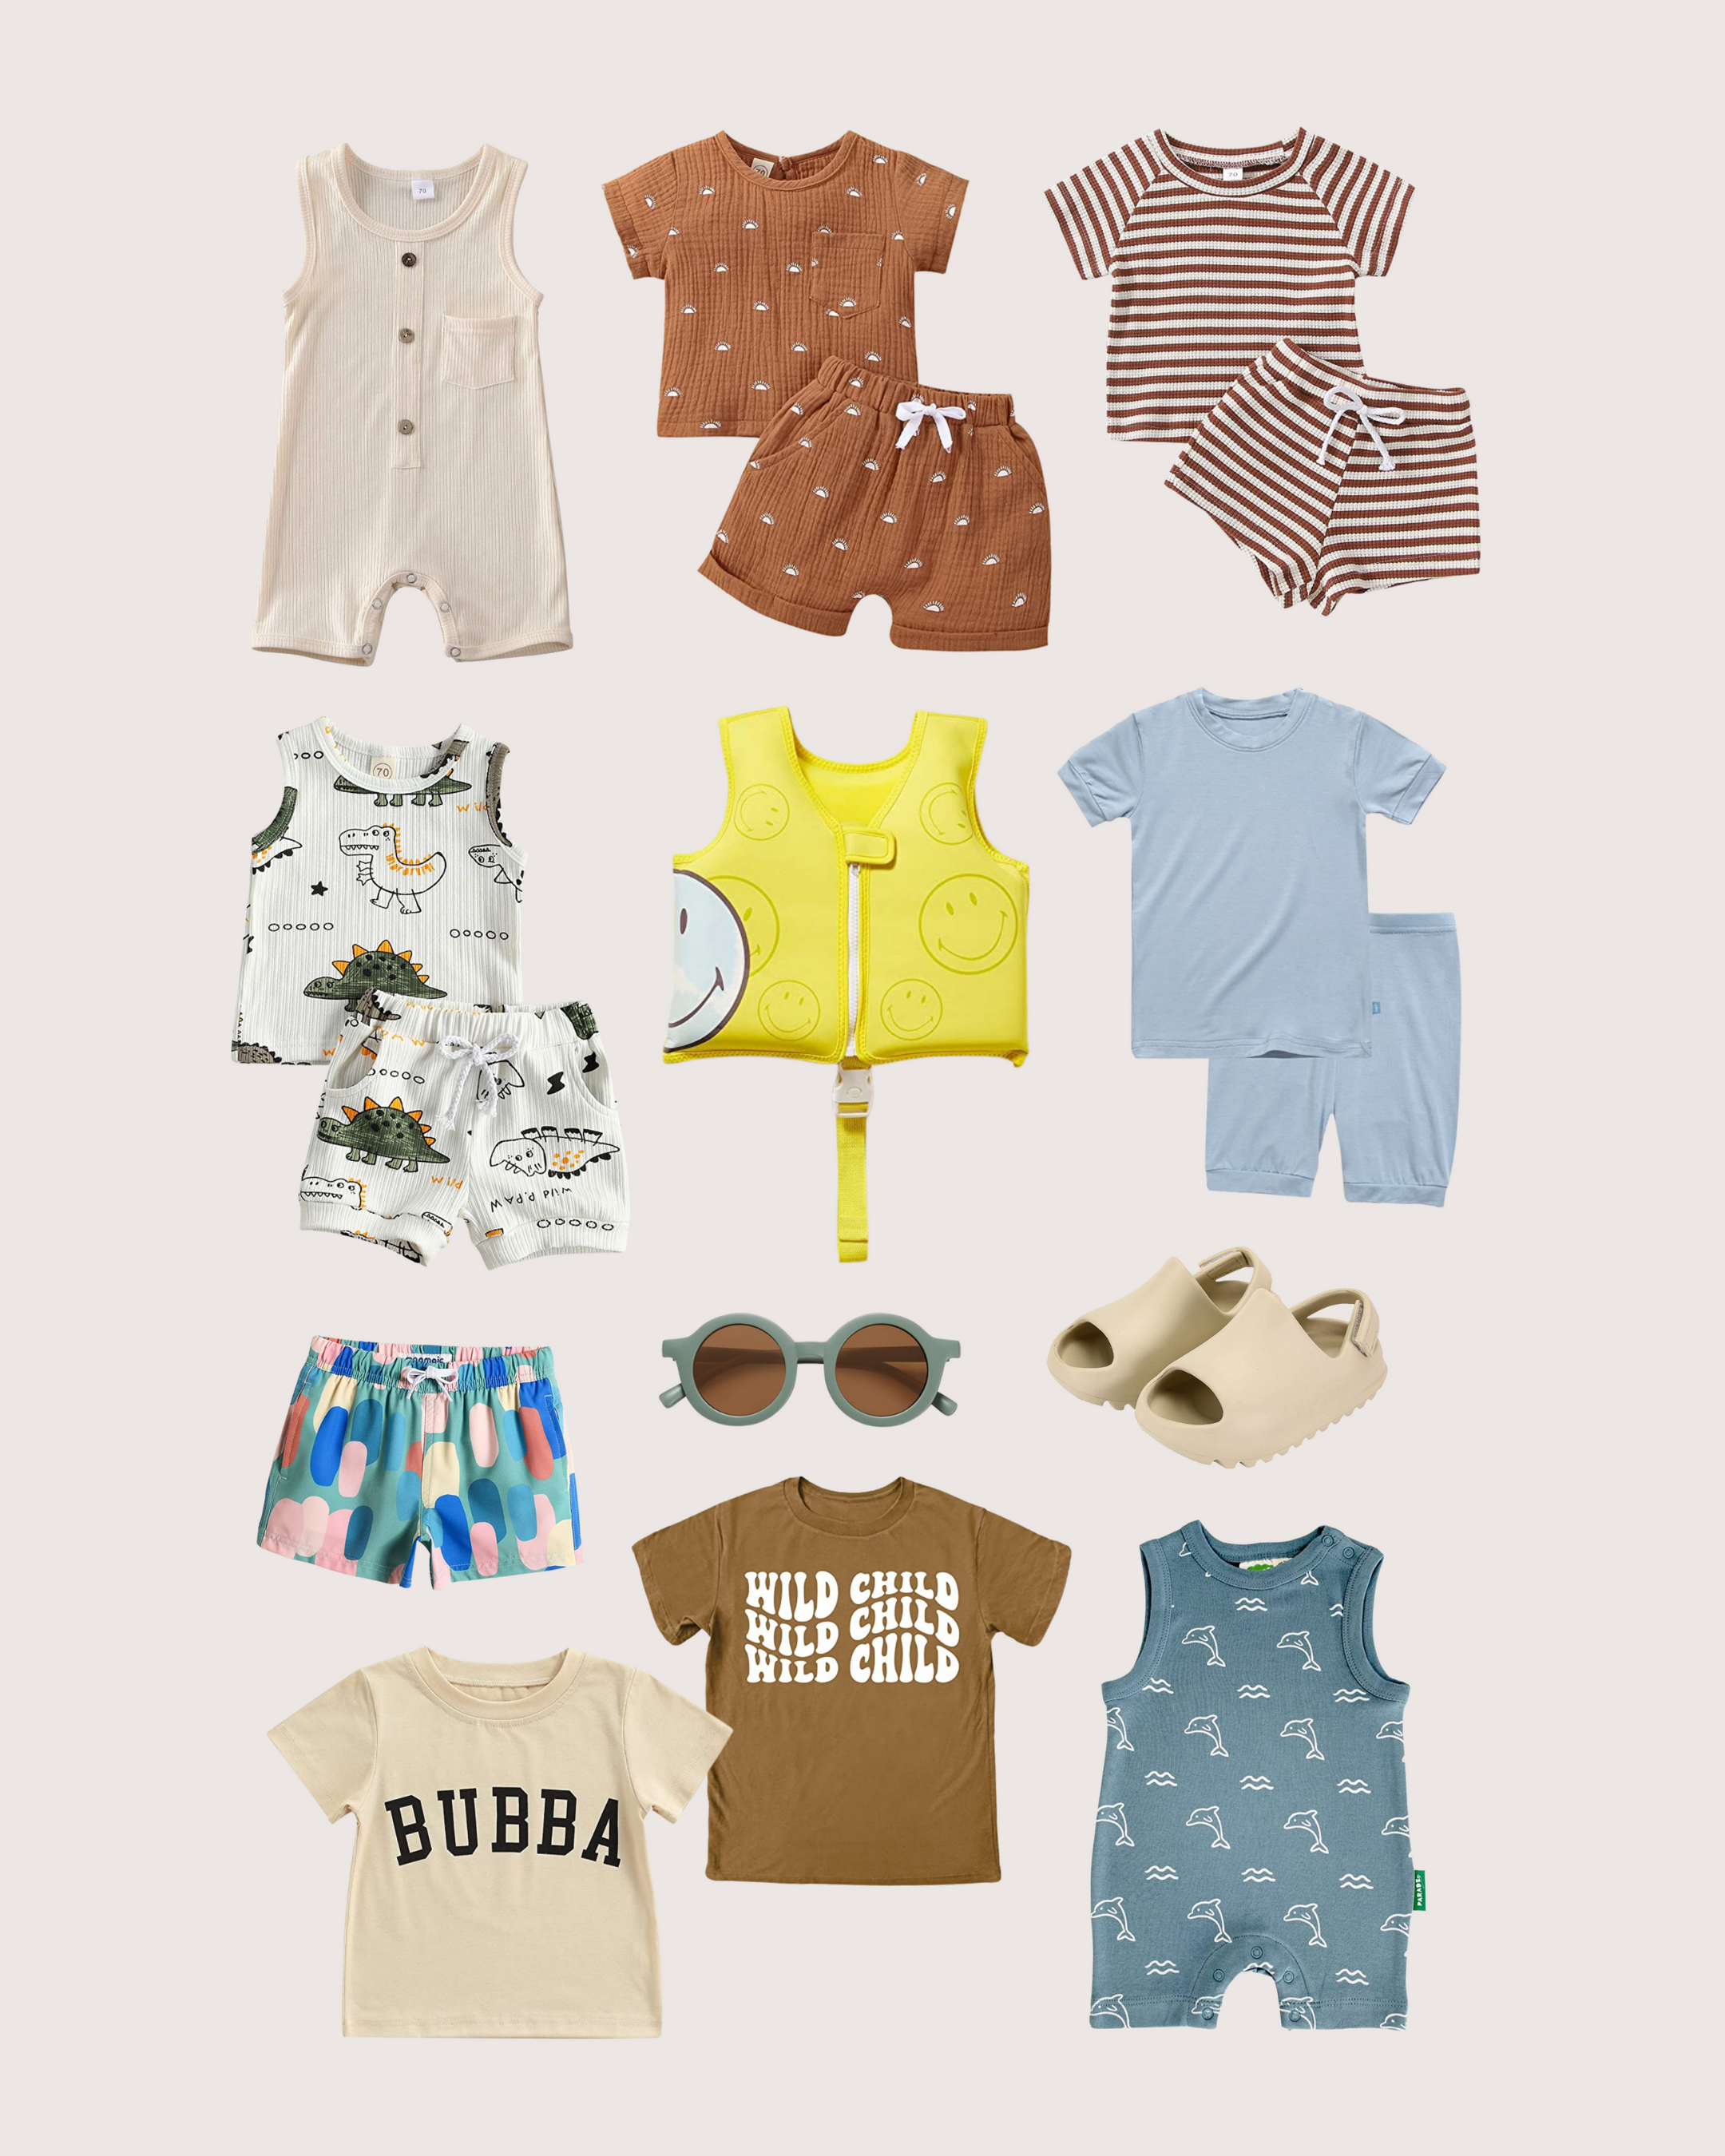 Toddler Summer Style Amazon Finds bresheppard.com.png